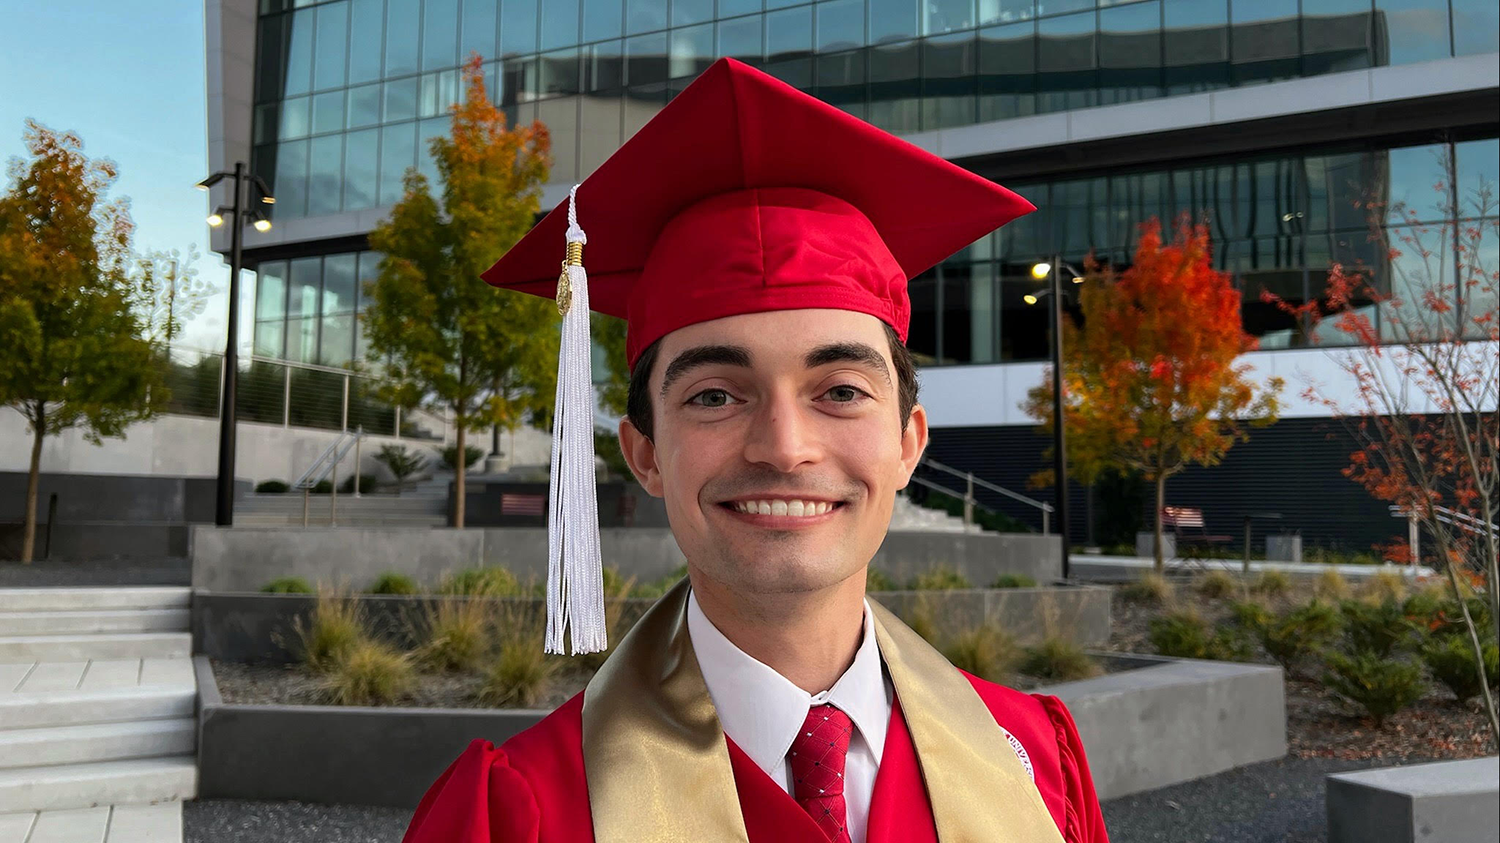 Daniel Lucas - Graduation to Vocation: Daniel Lucas is Enhancing Pulp and Paper Operations - College of Natural Resources News NC State University